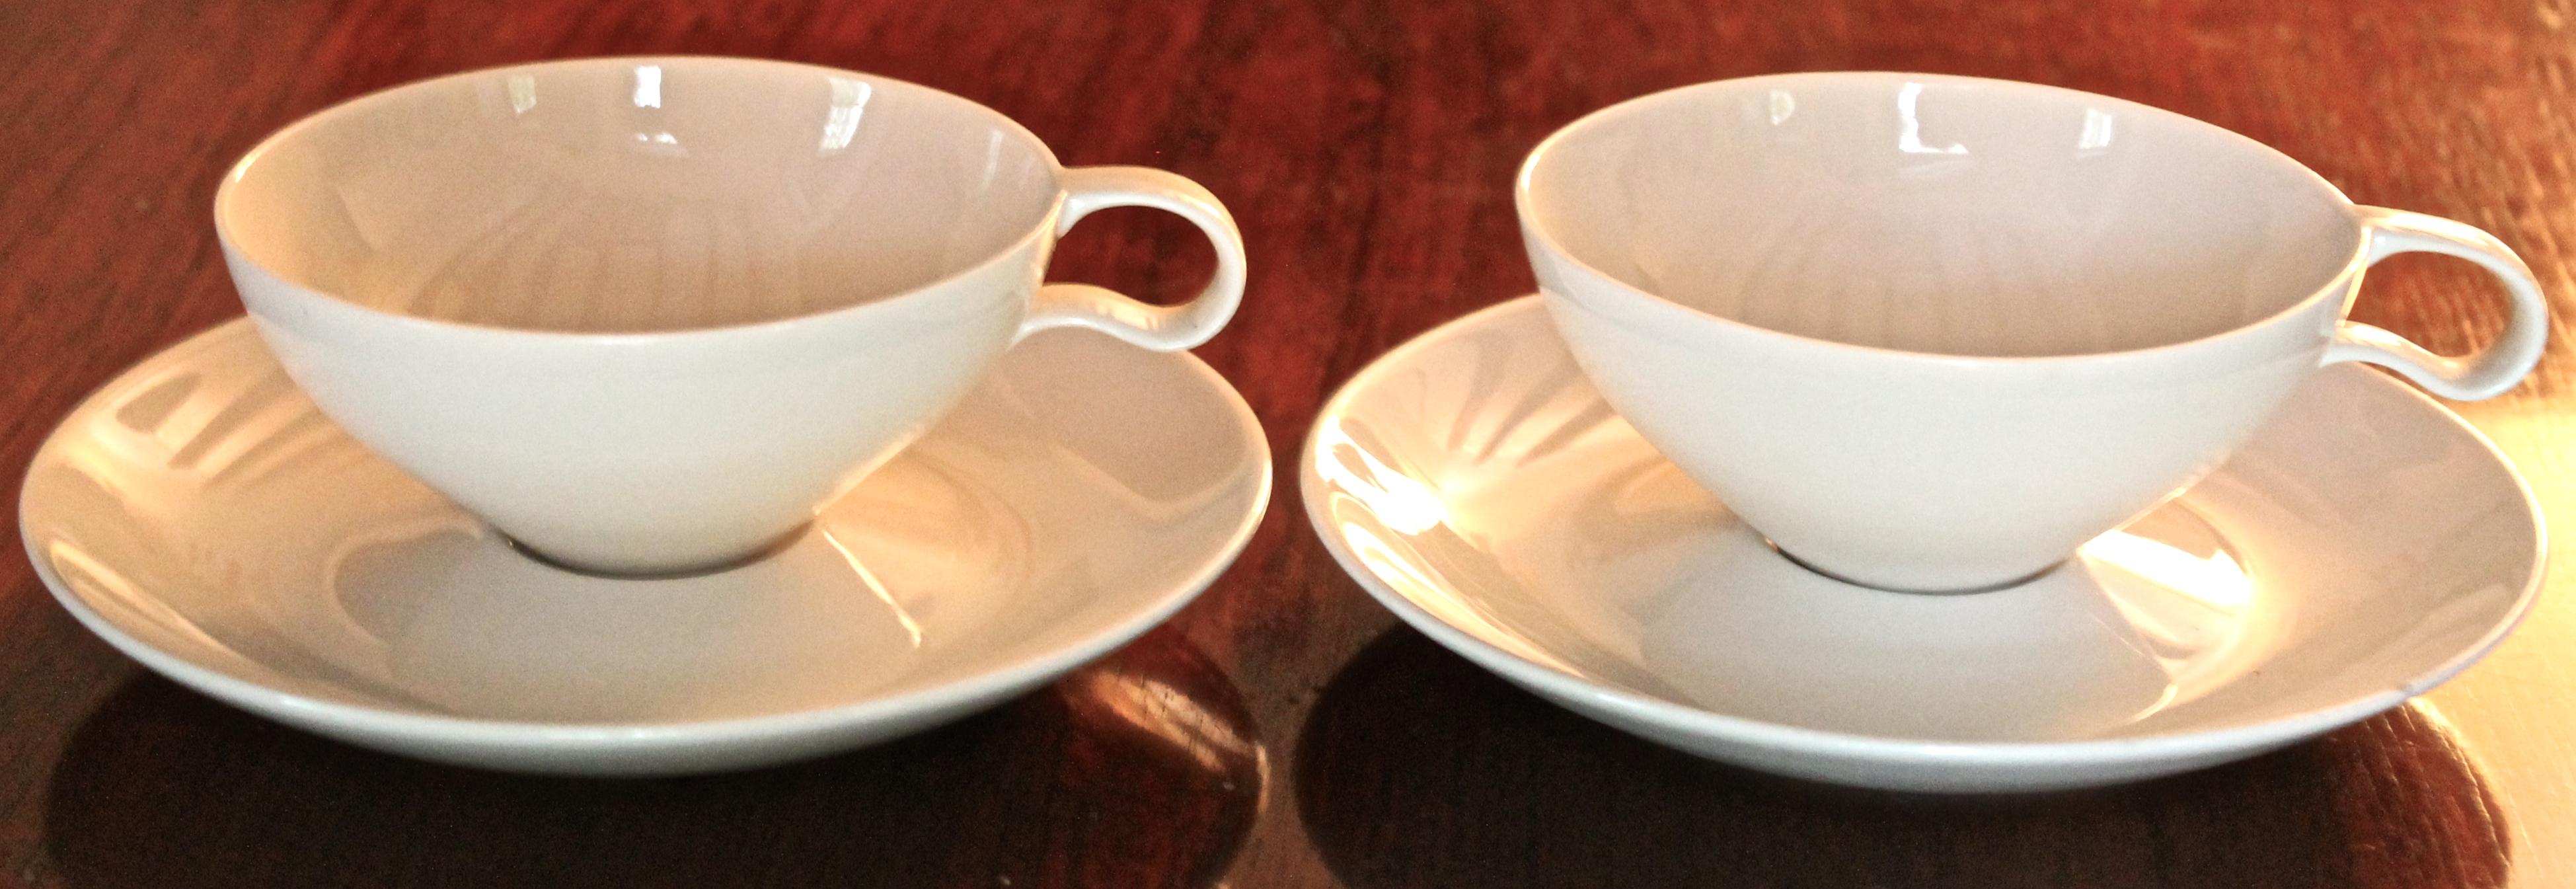 The original discontinued cups with the downward handles and golden tan added over the porcelain white from the famous set commissioned by The Museum of Modern Art (MOMA). Four cups and four saucers, most are signed. 